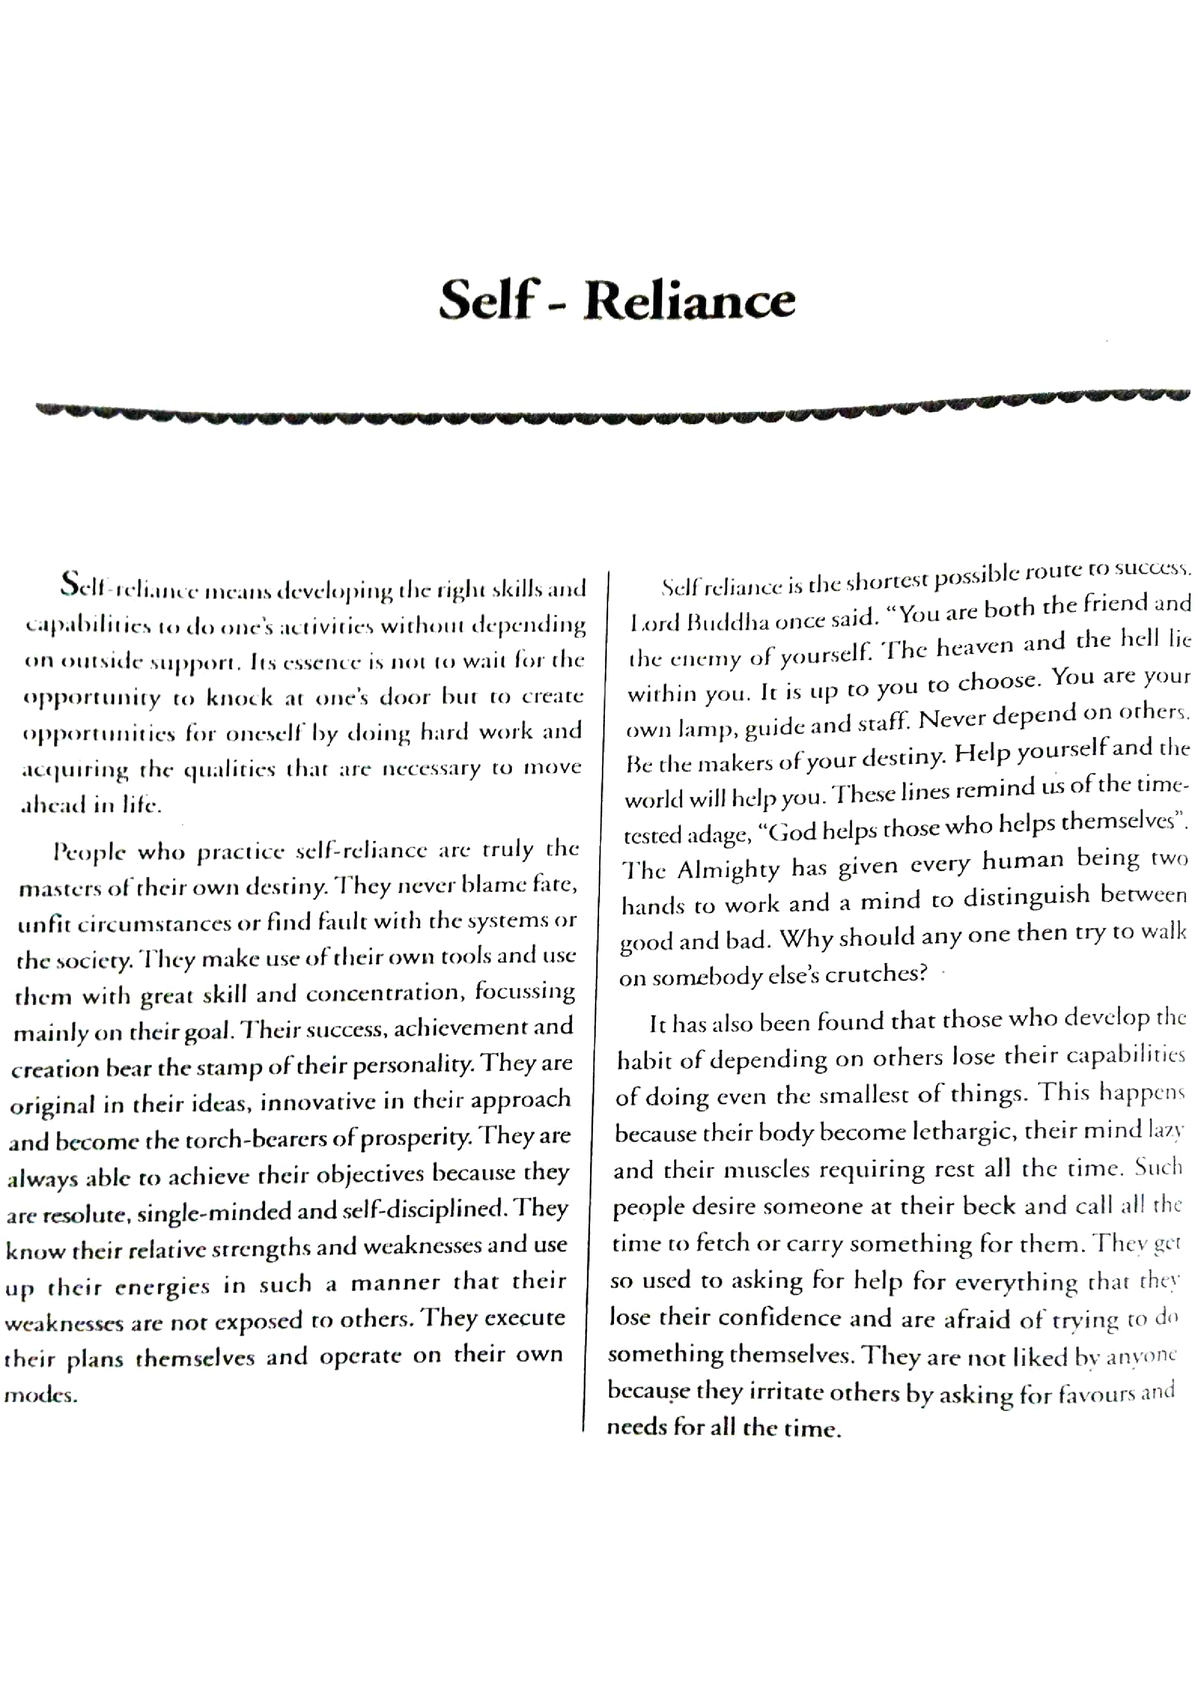 essay on self reliance in english